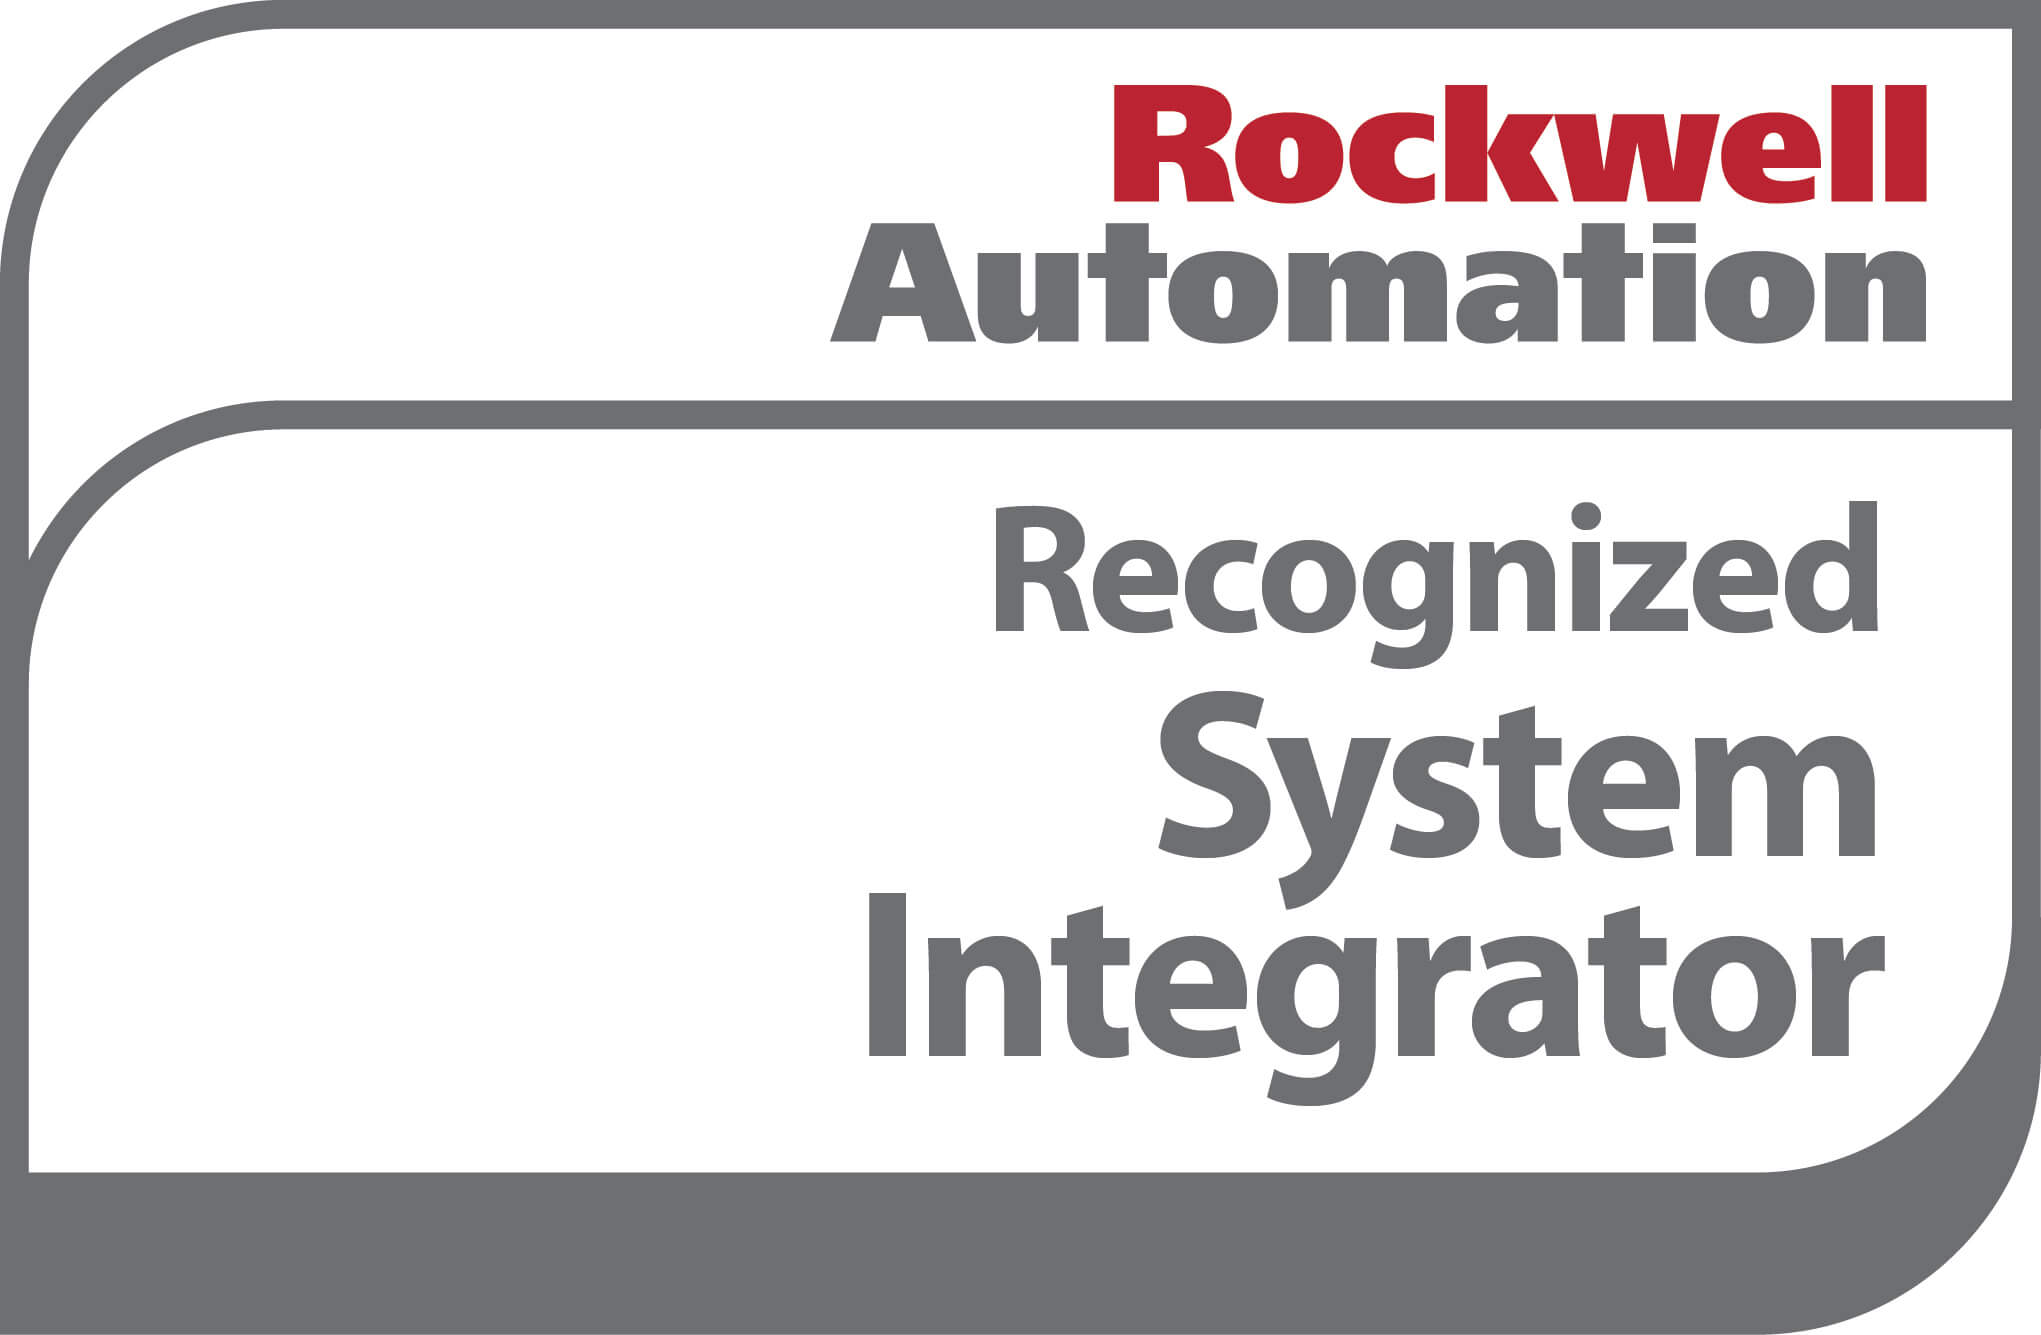 rockwell automation recognized system integrator